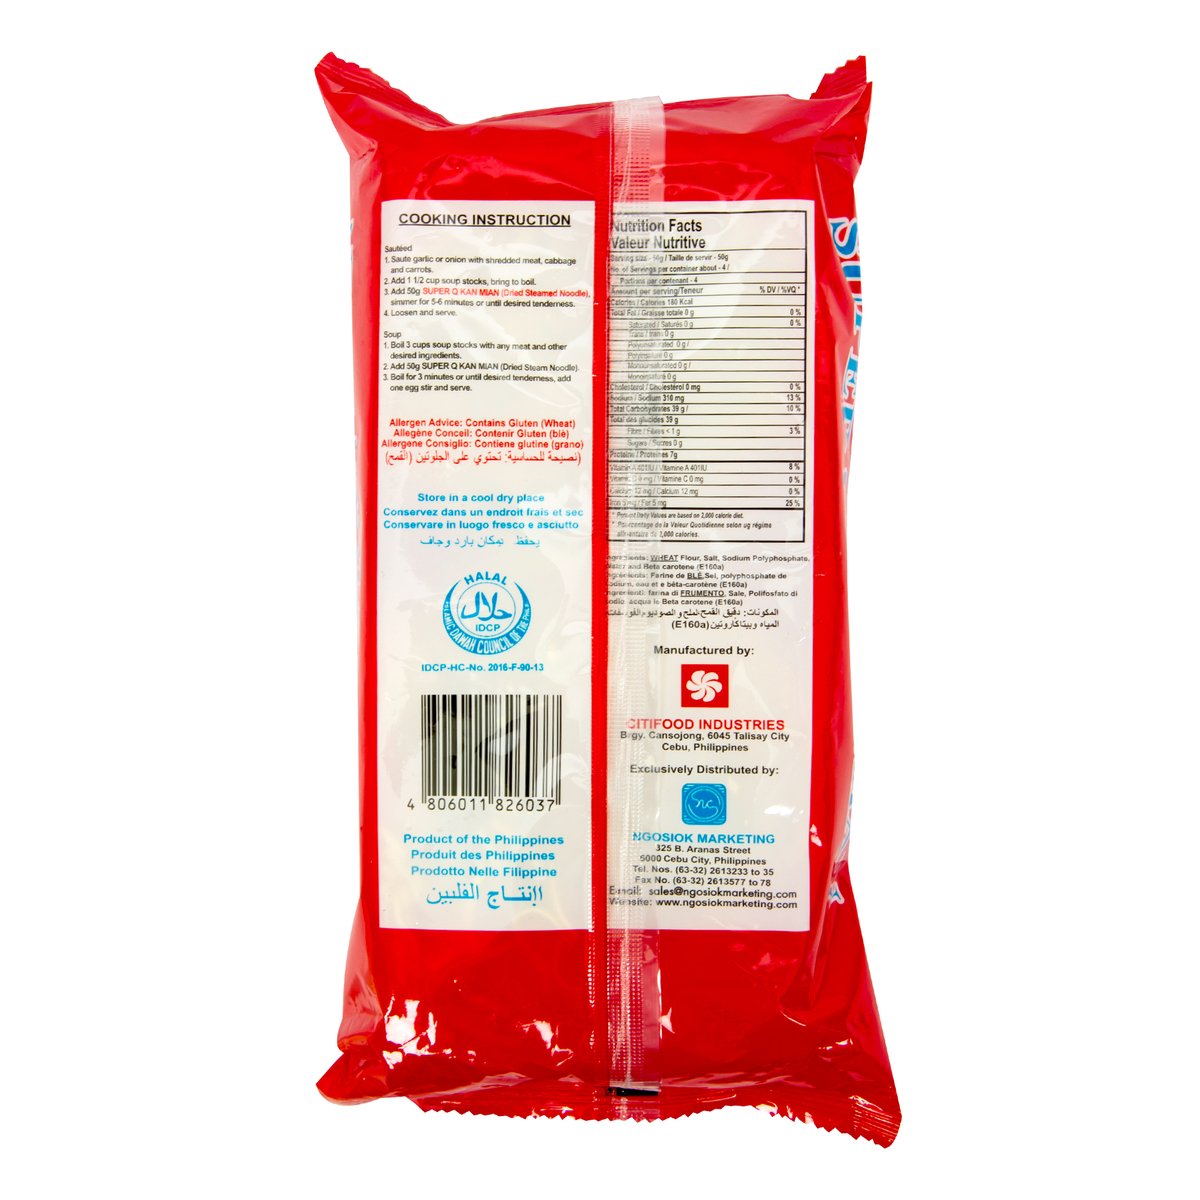 Super Q Kan Mian Dried Steamed Noodle 200 g